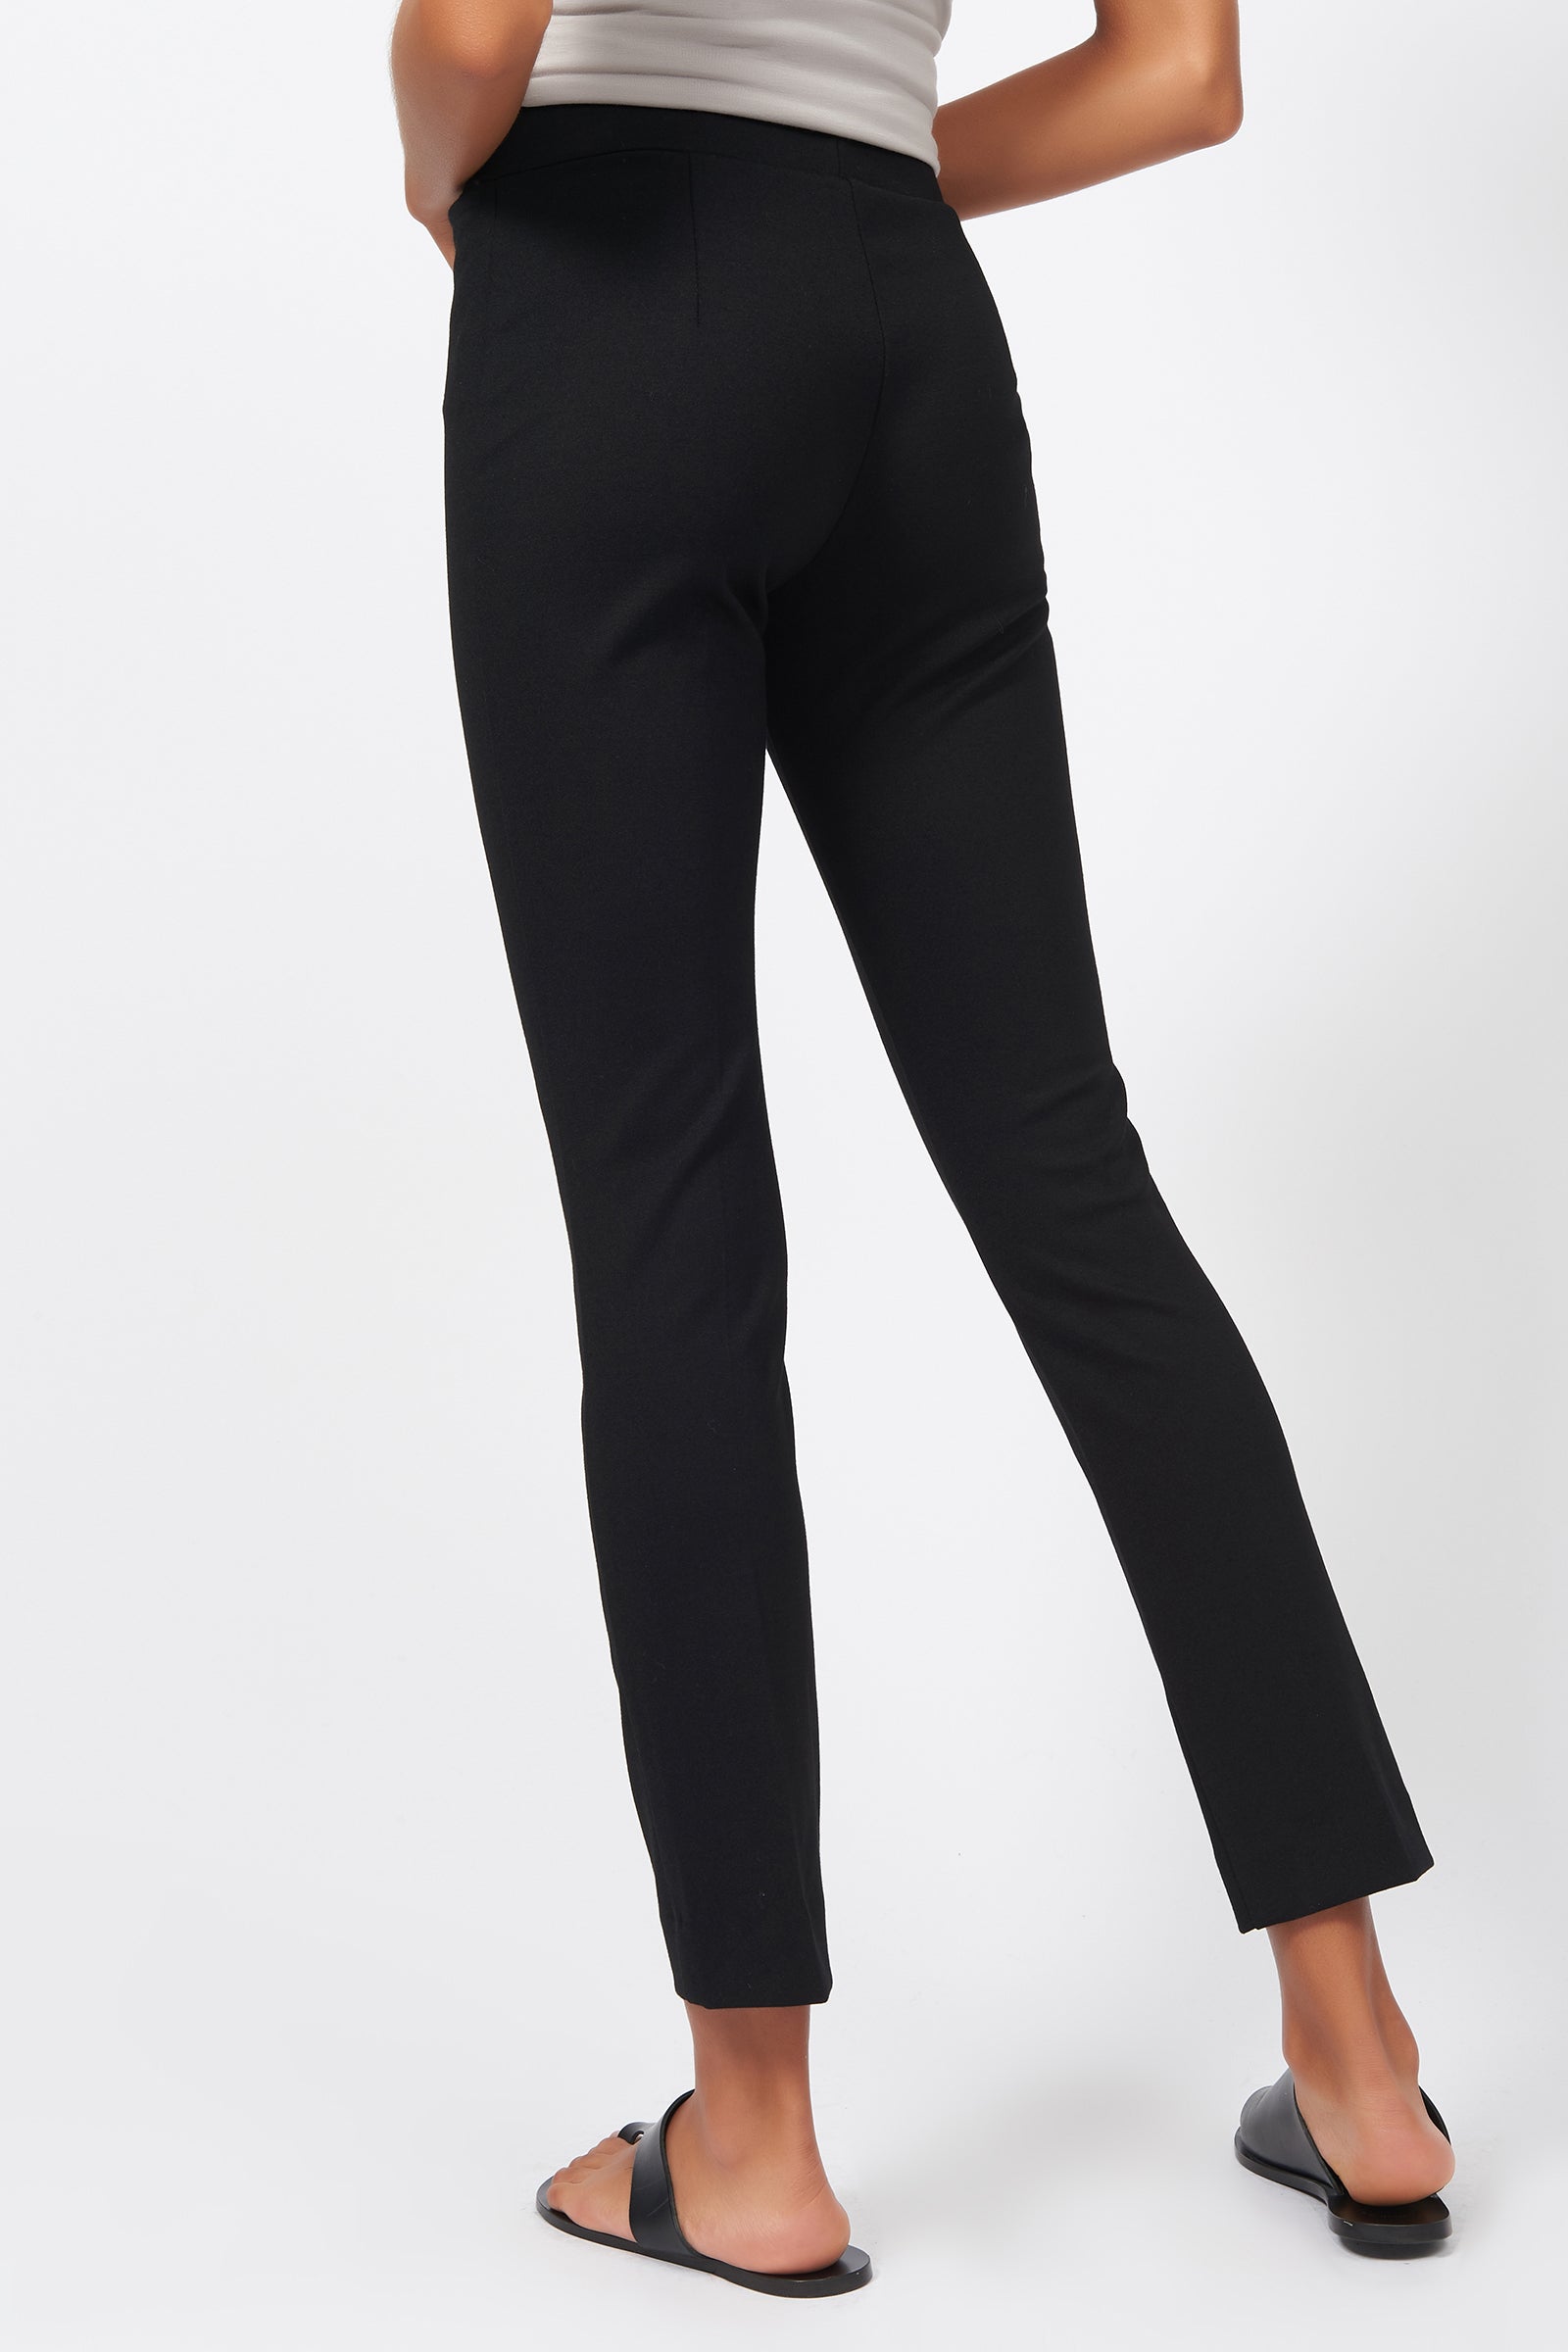 Kal Rieman Pintuck Ponte Ankle Pant in Black on Model Front View